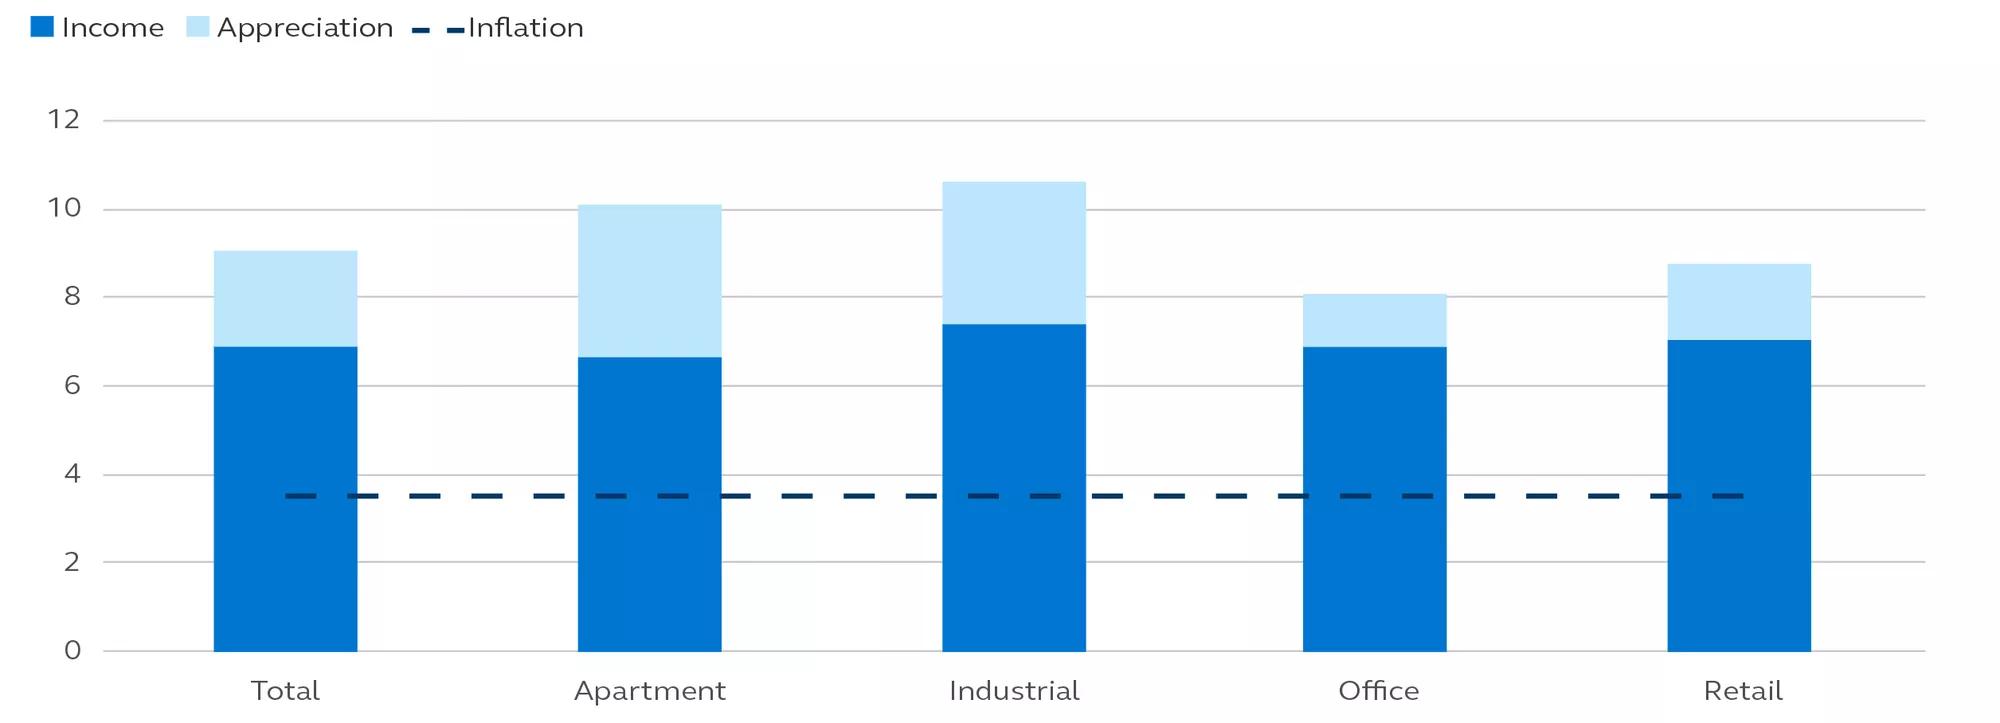 Bar chart that compares income, appreciation, and inflation for property types apartment, industrial, office, and retail